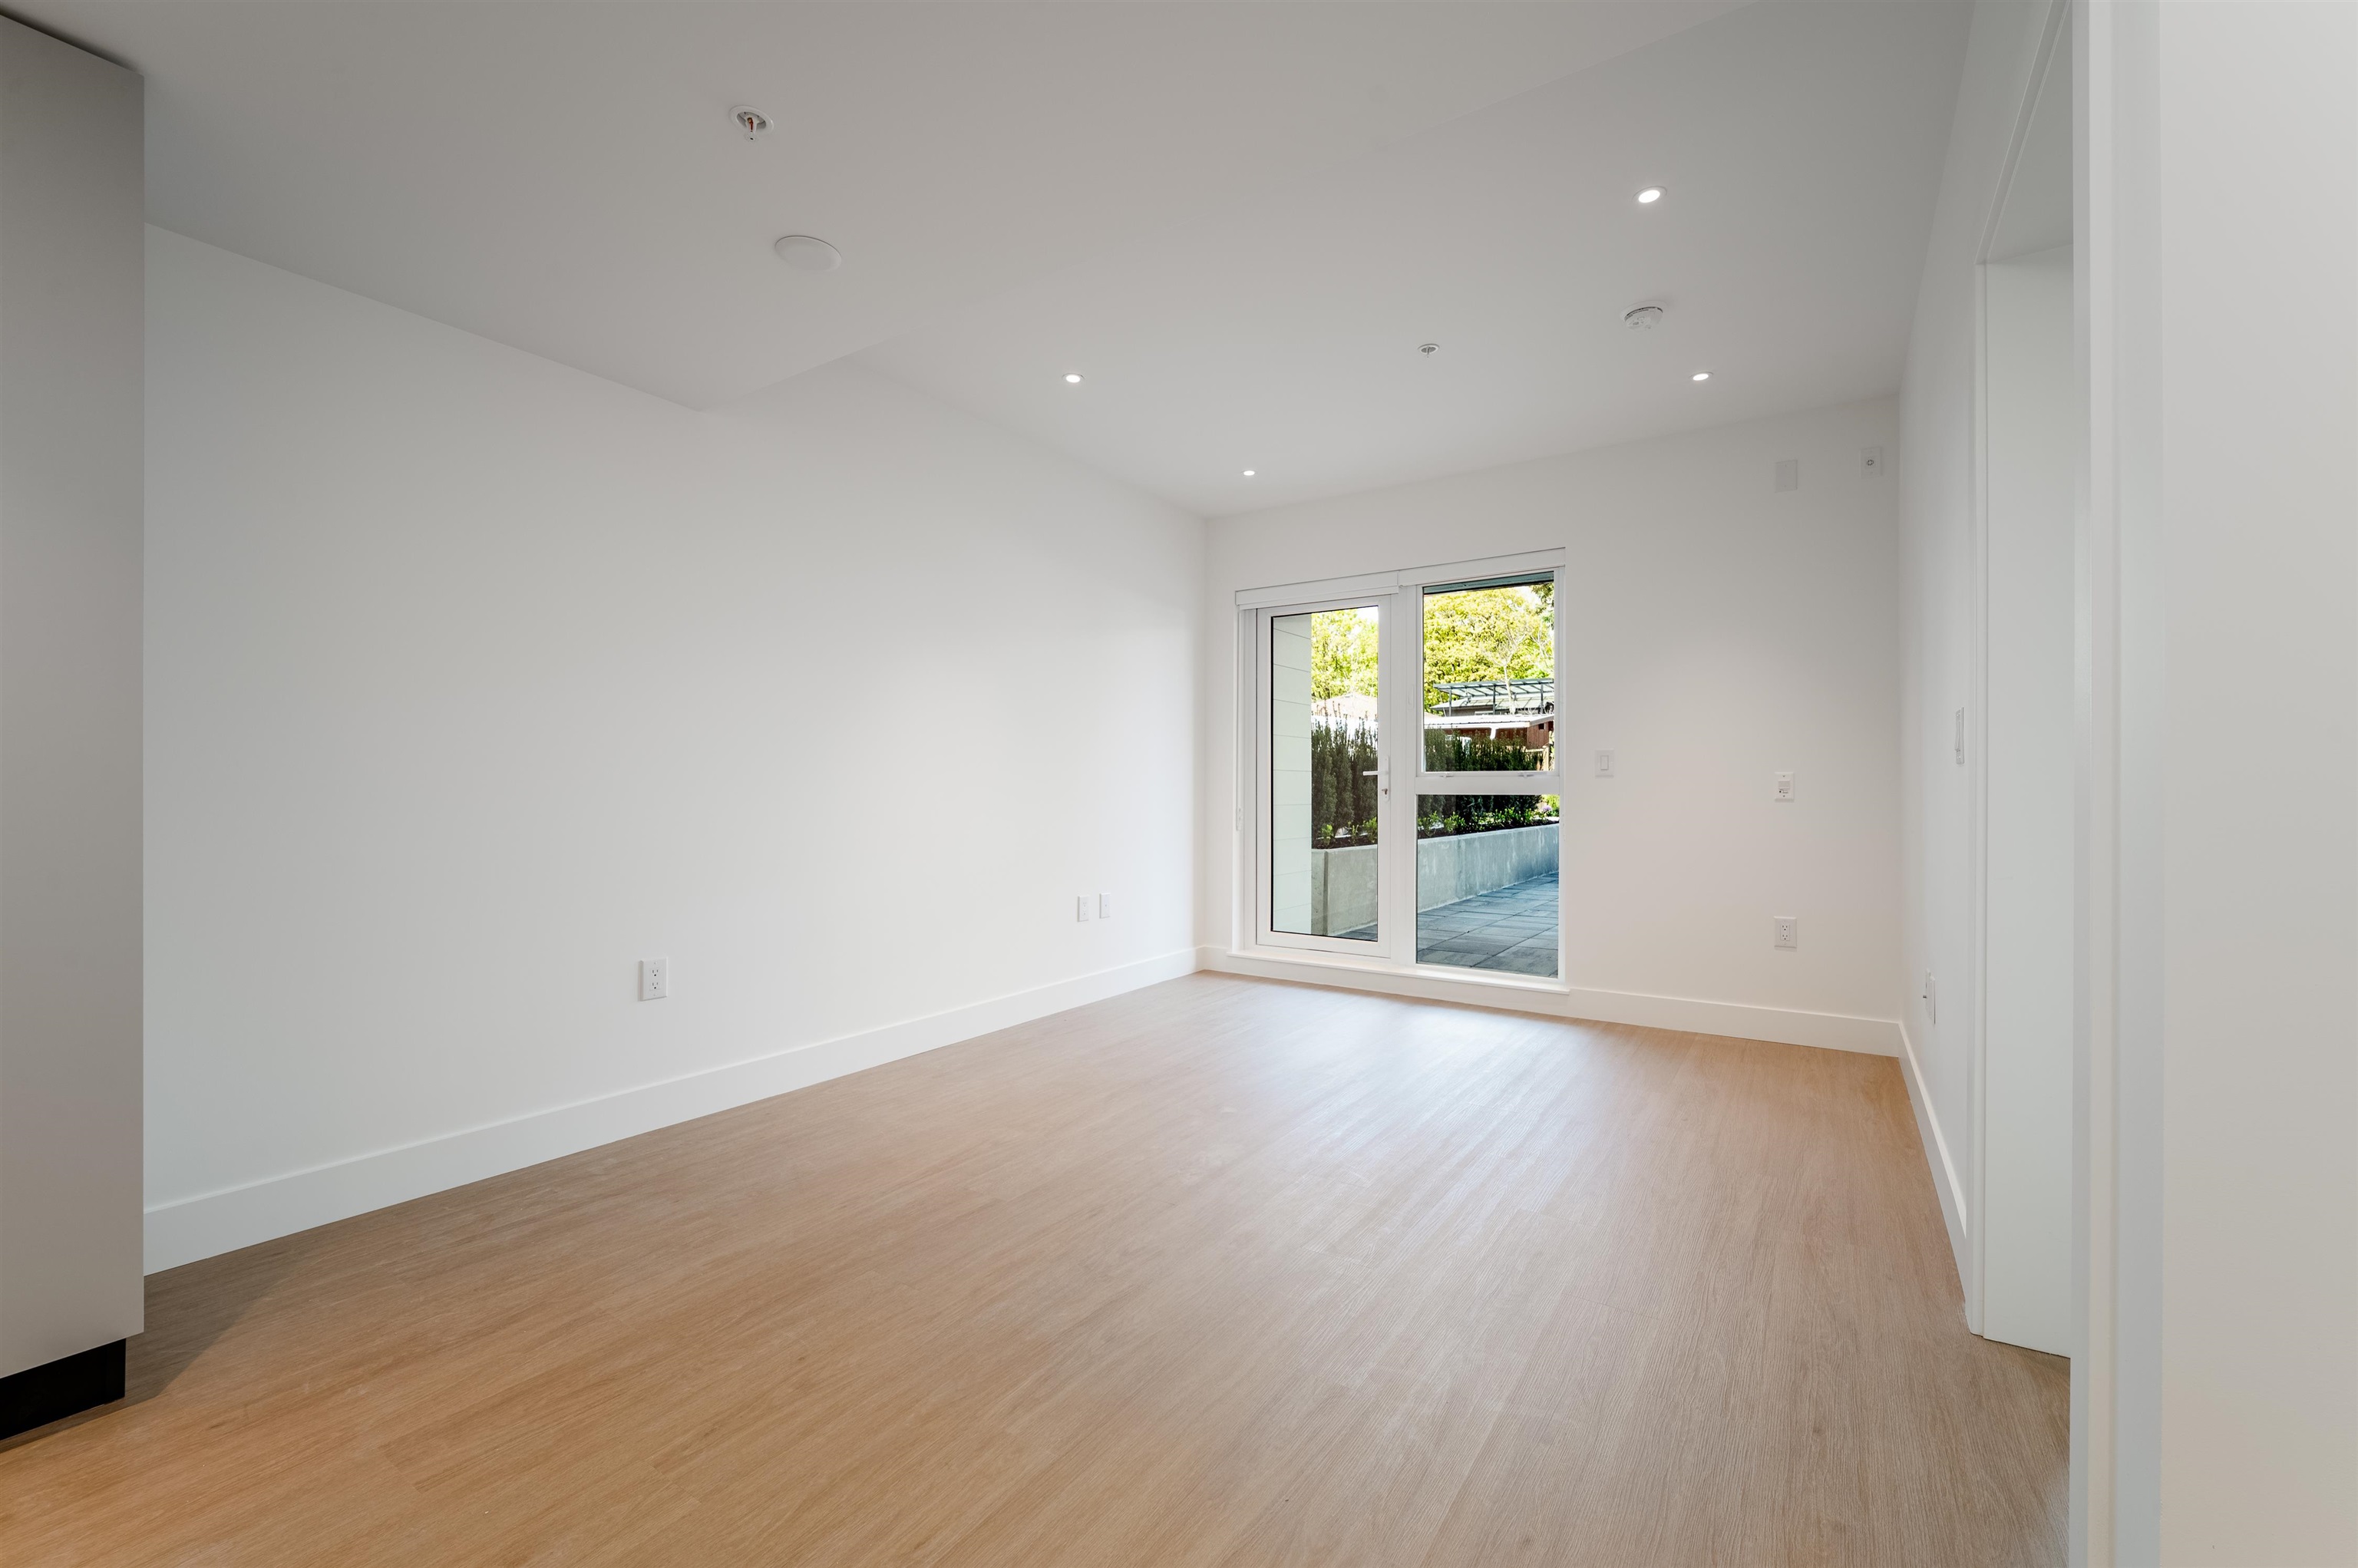 Listing image of 107 2235 E BROADWAY